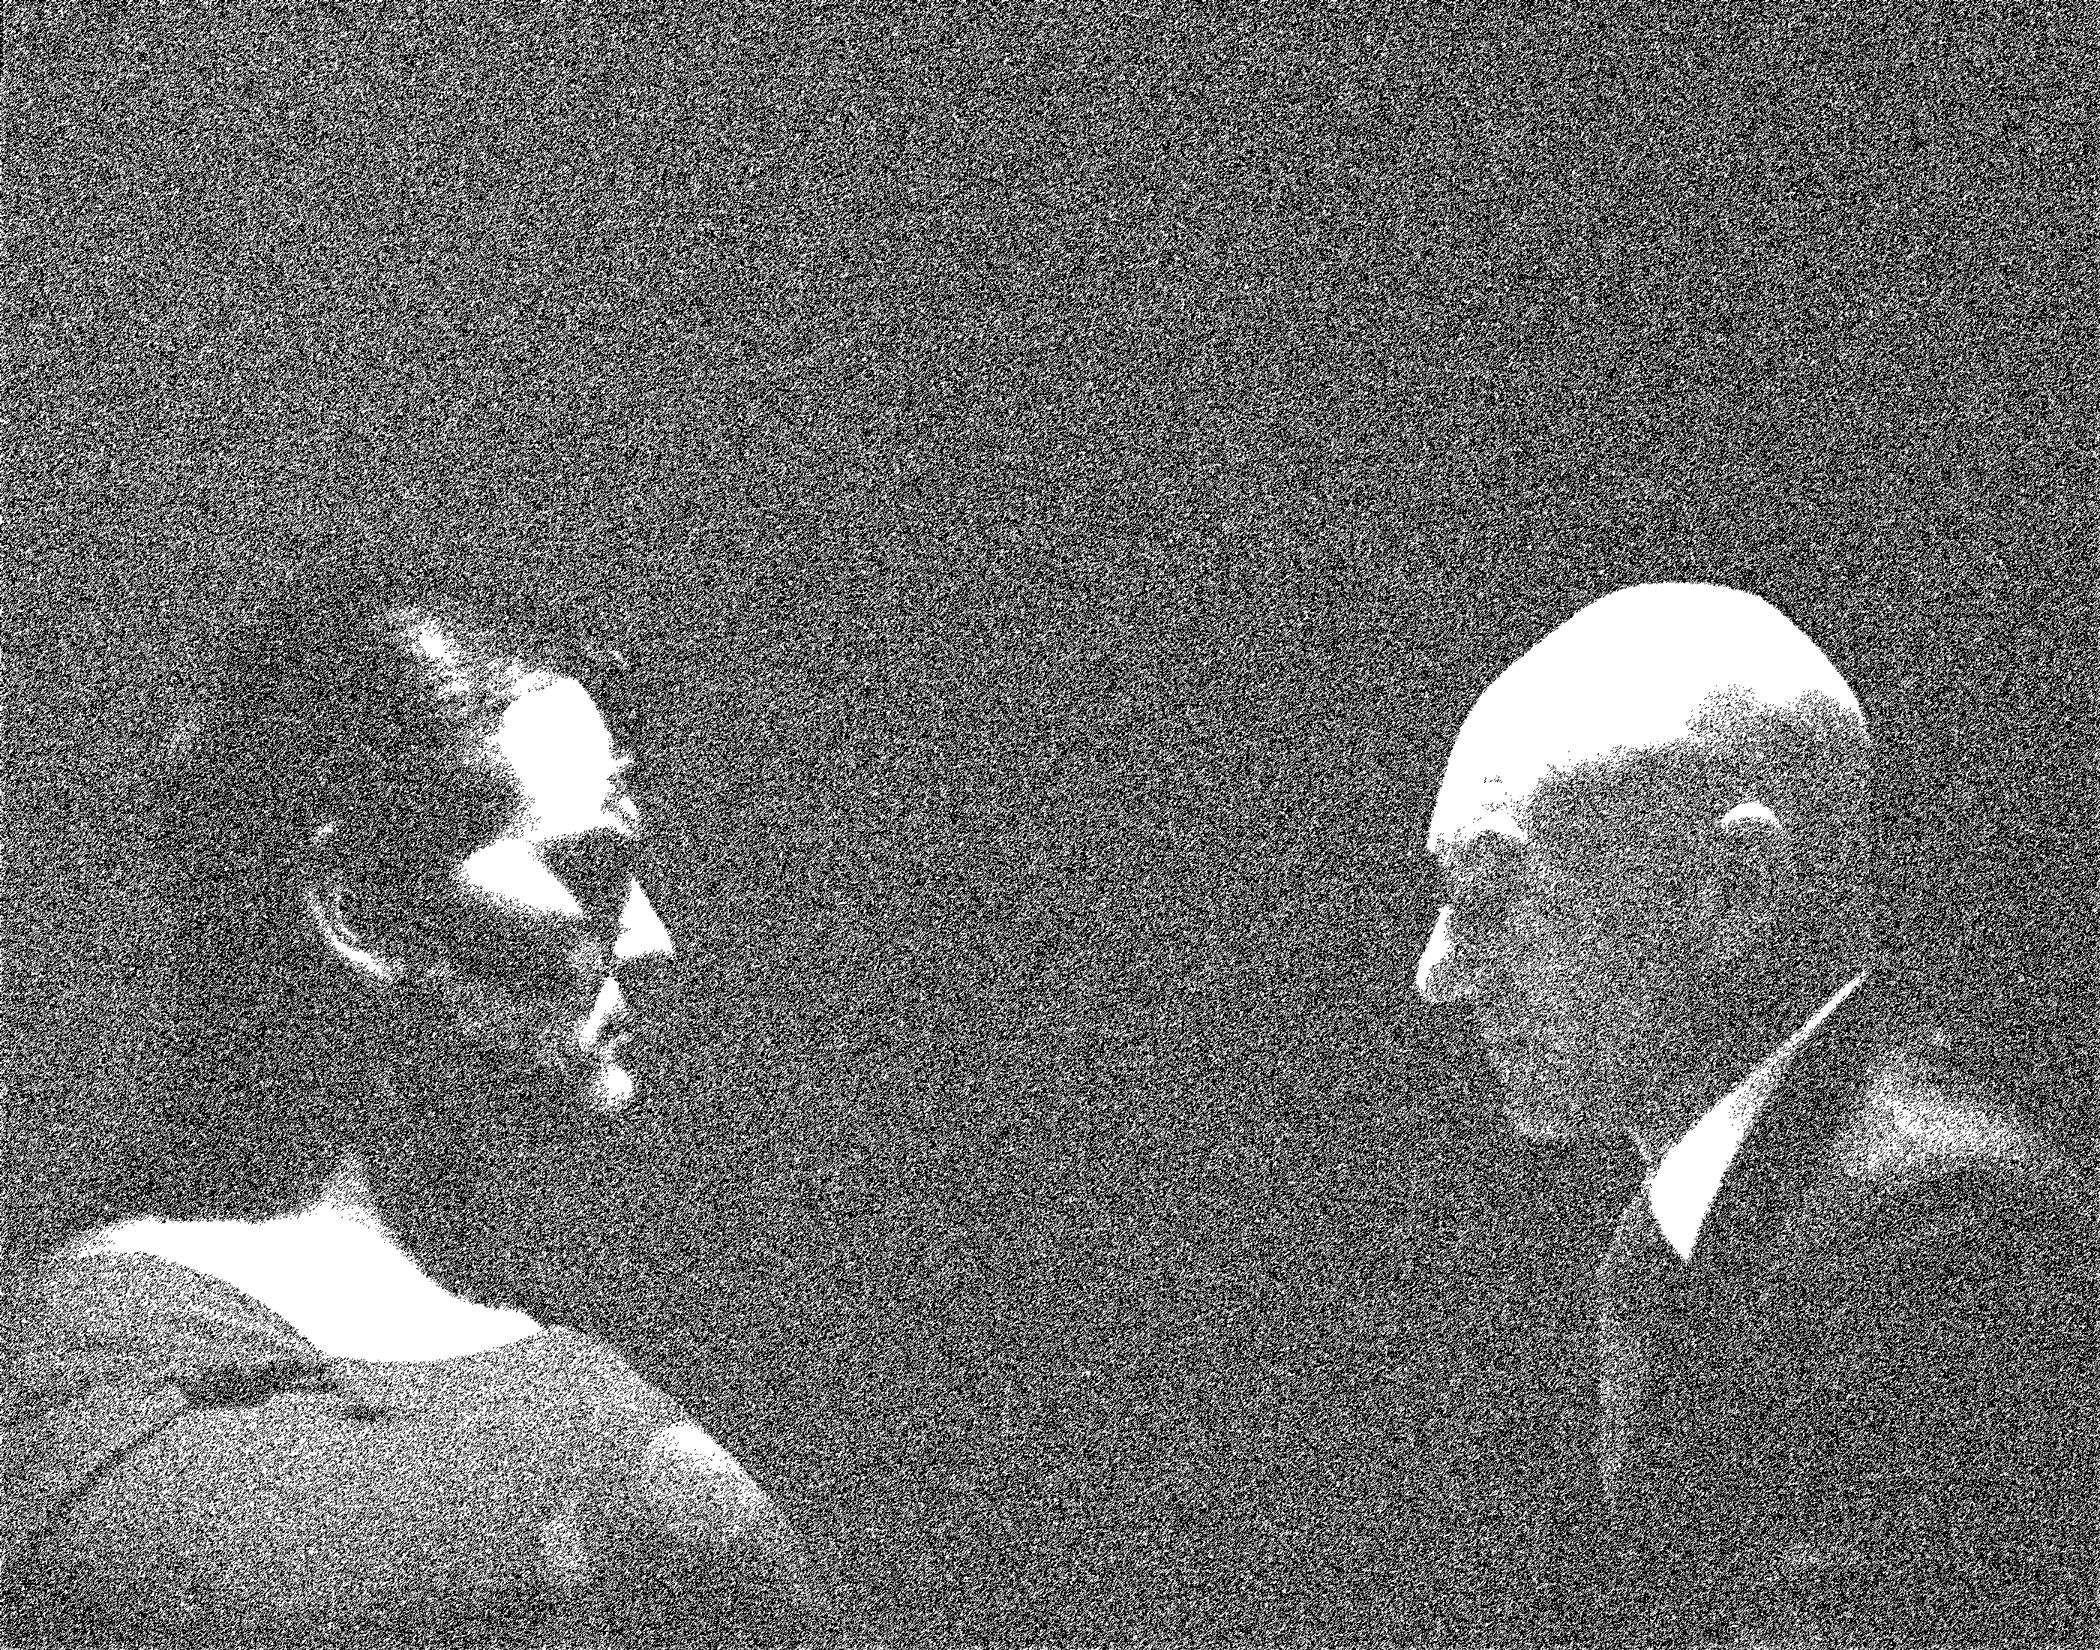 Superman and Lex Luthor engaged in a face-off battle against each other.